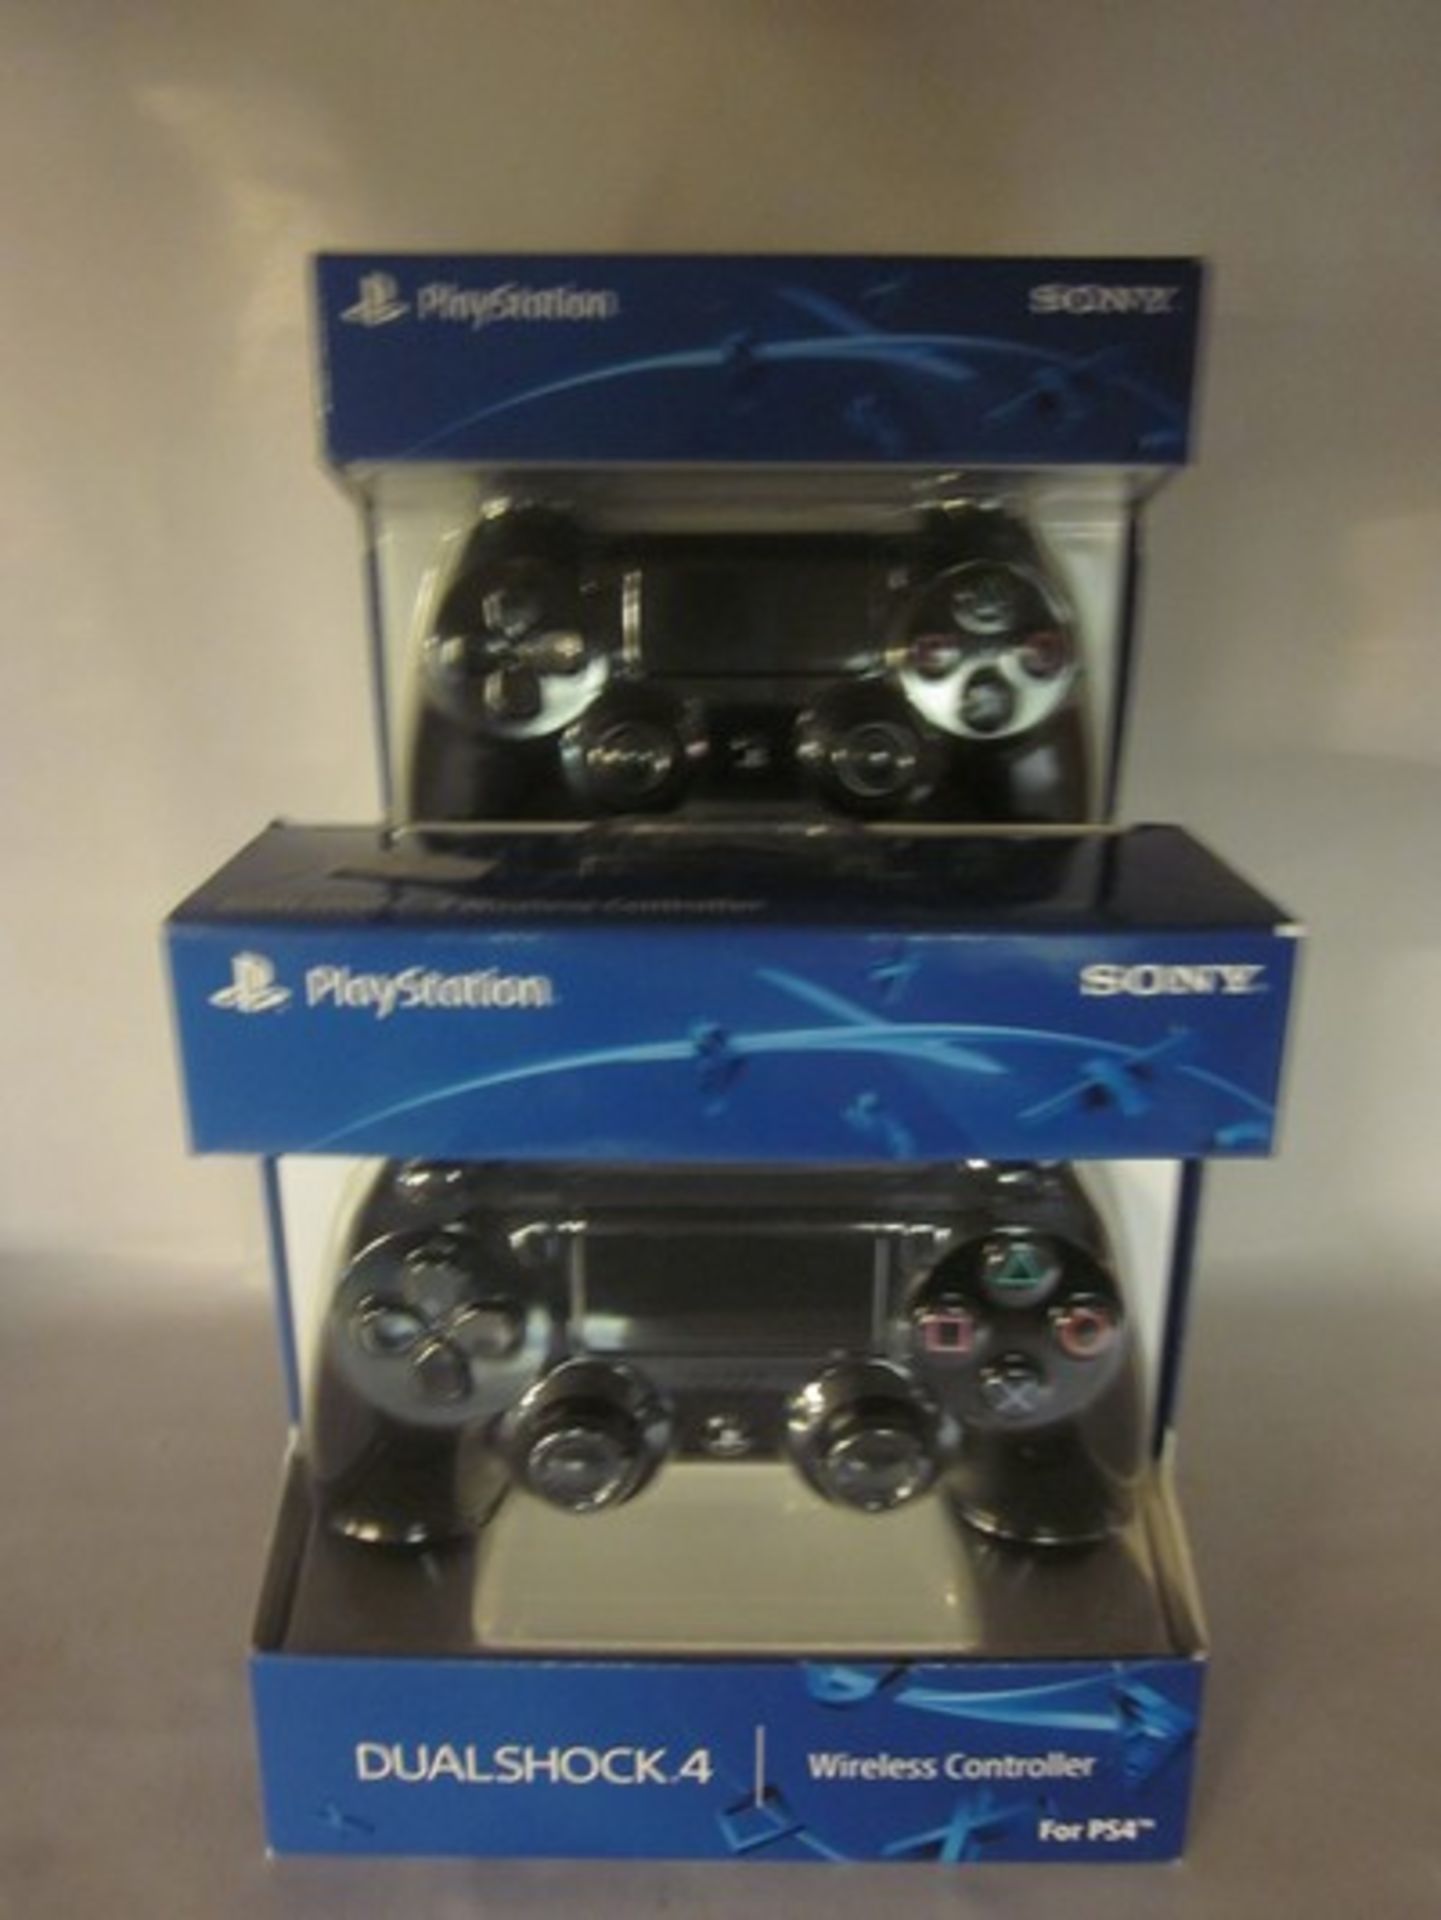 *Two black Sony Playstation 4 dualshock wireless controller's (Boxed as new). Buyers premium 20%.